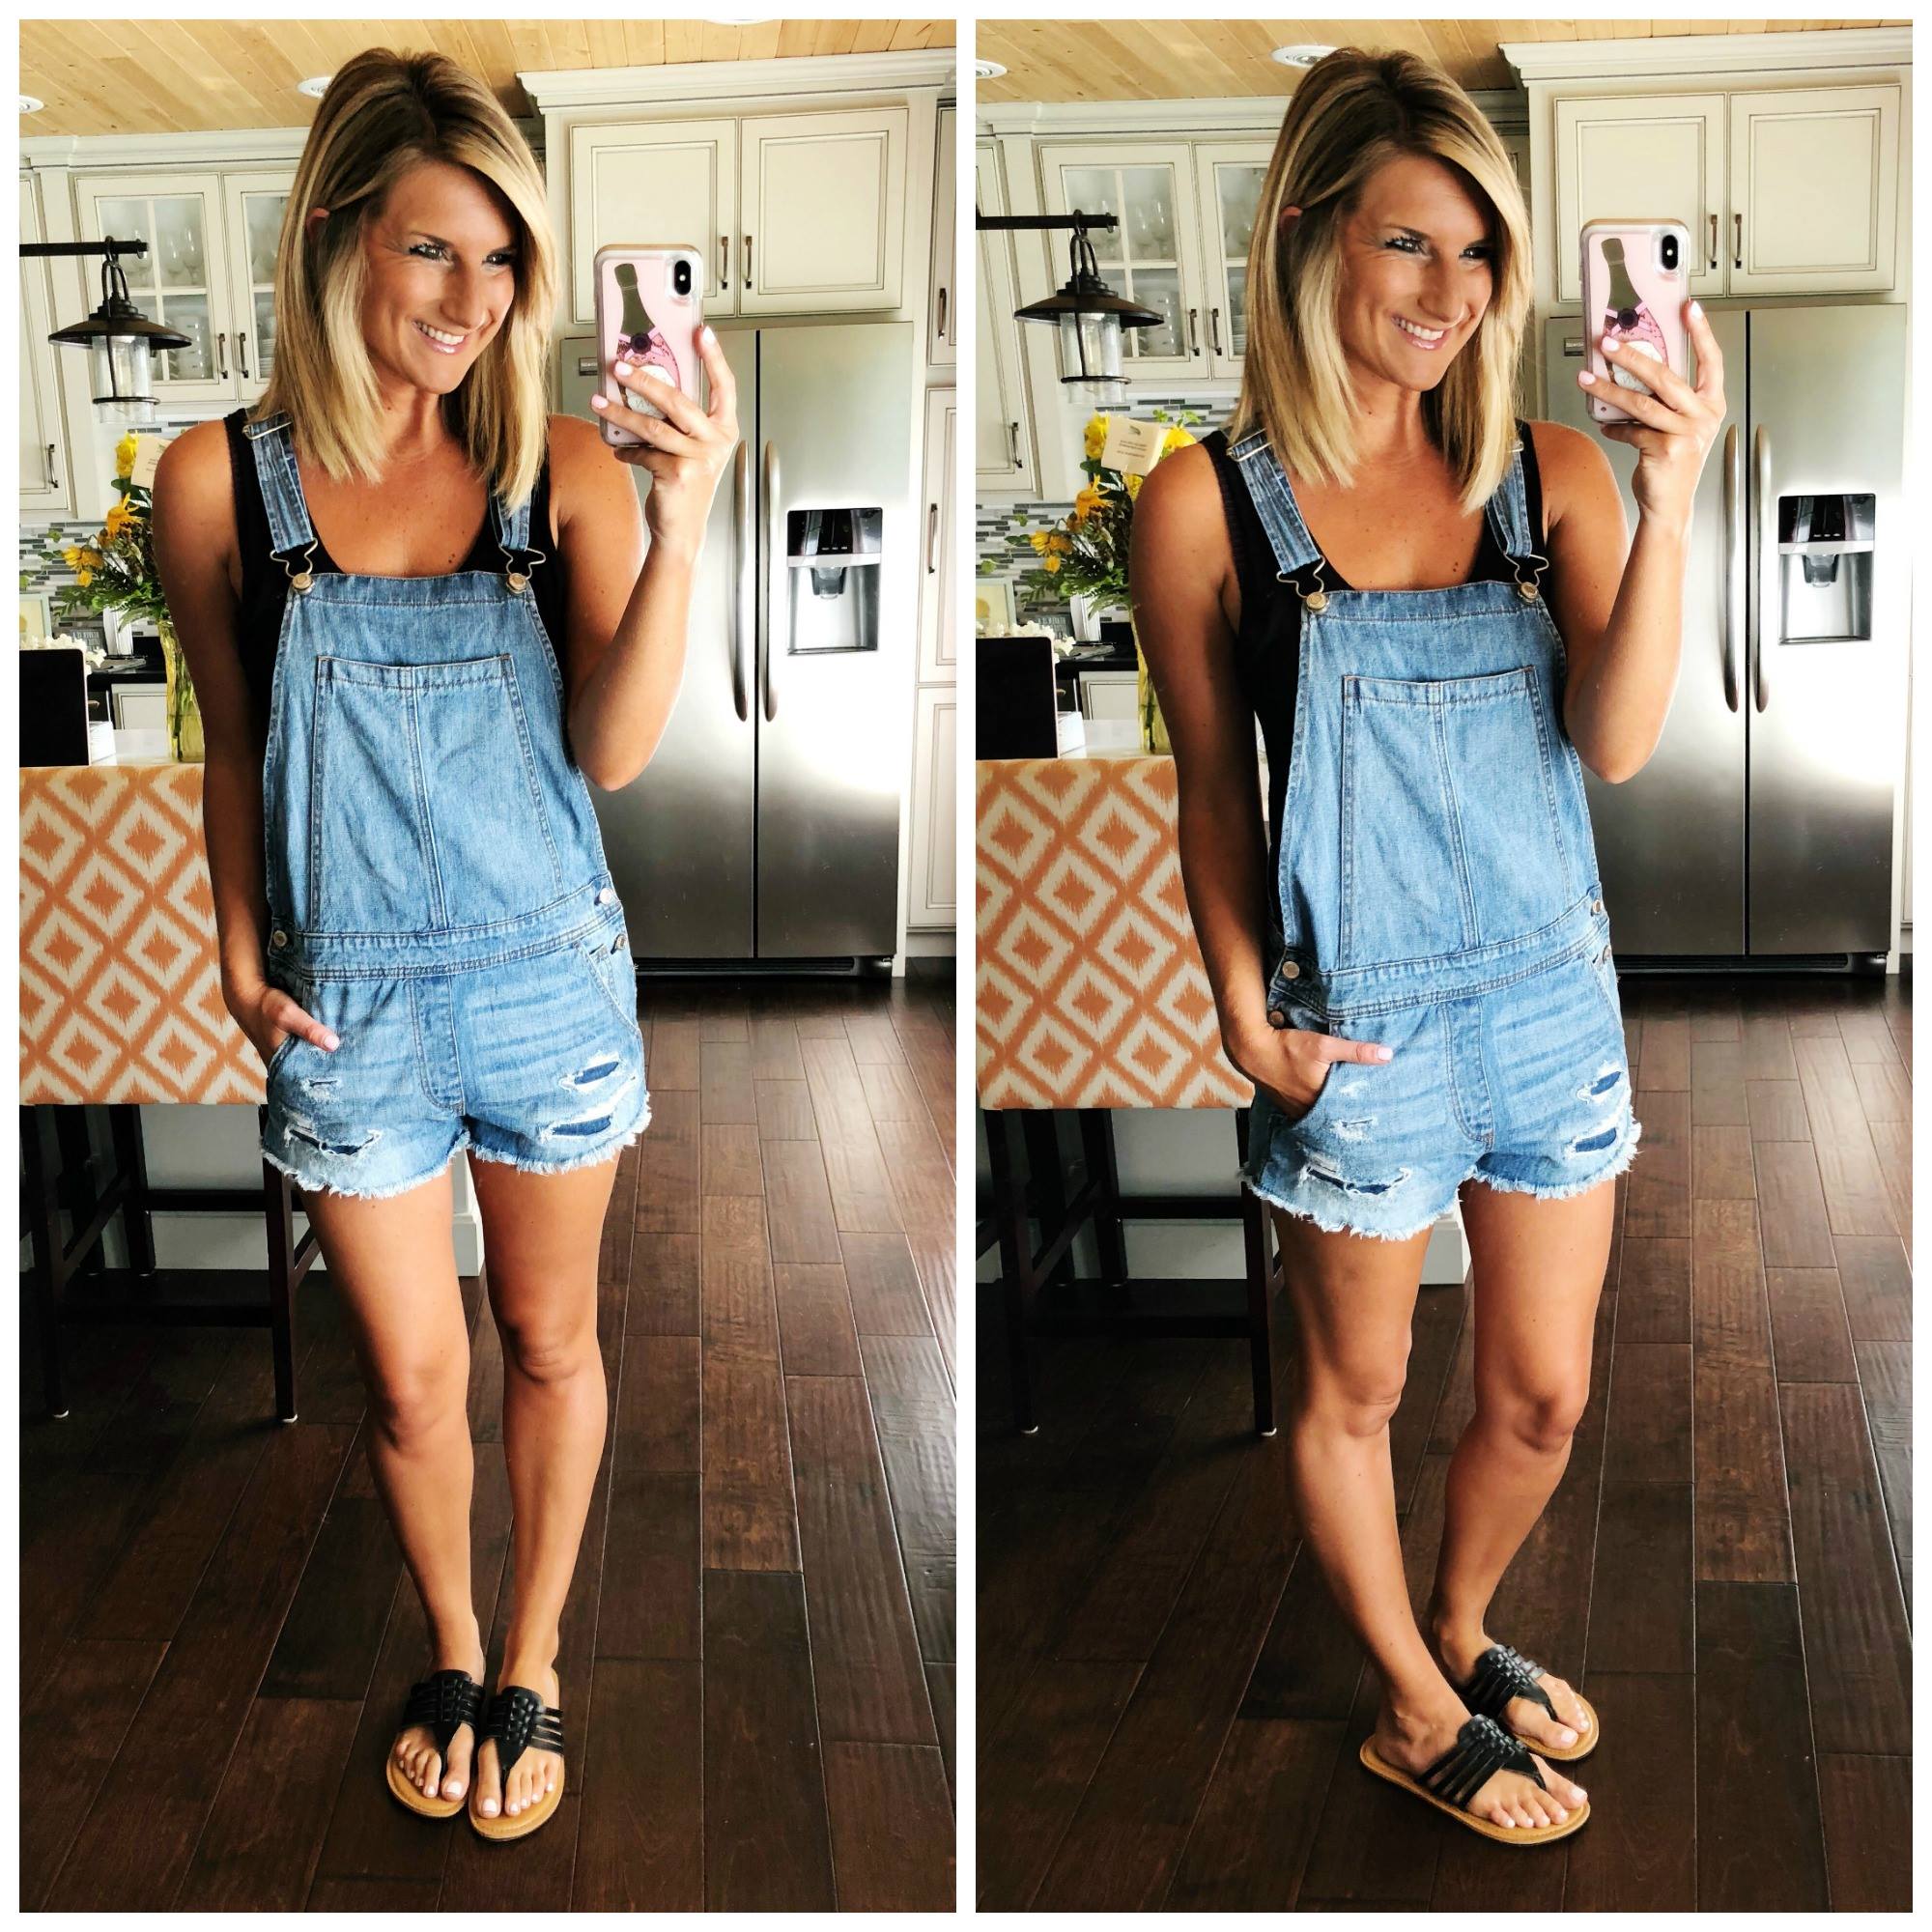 What to wear with overalls // Essential tank top // Comfortable sandals